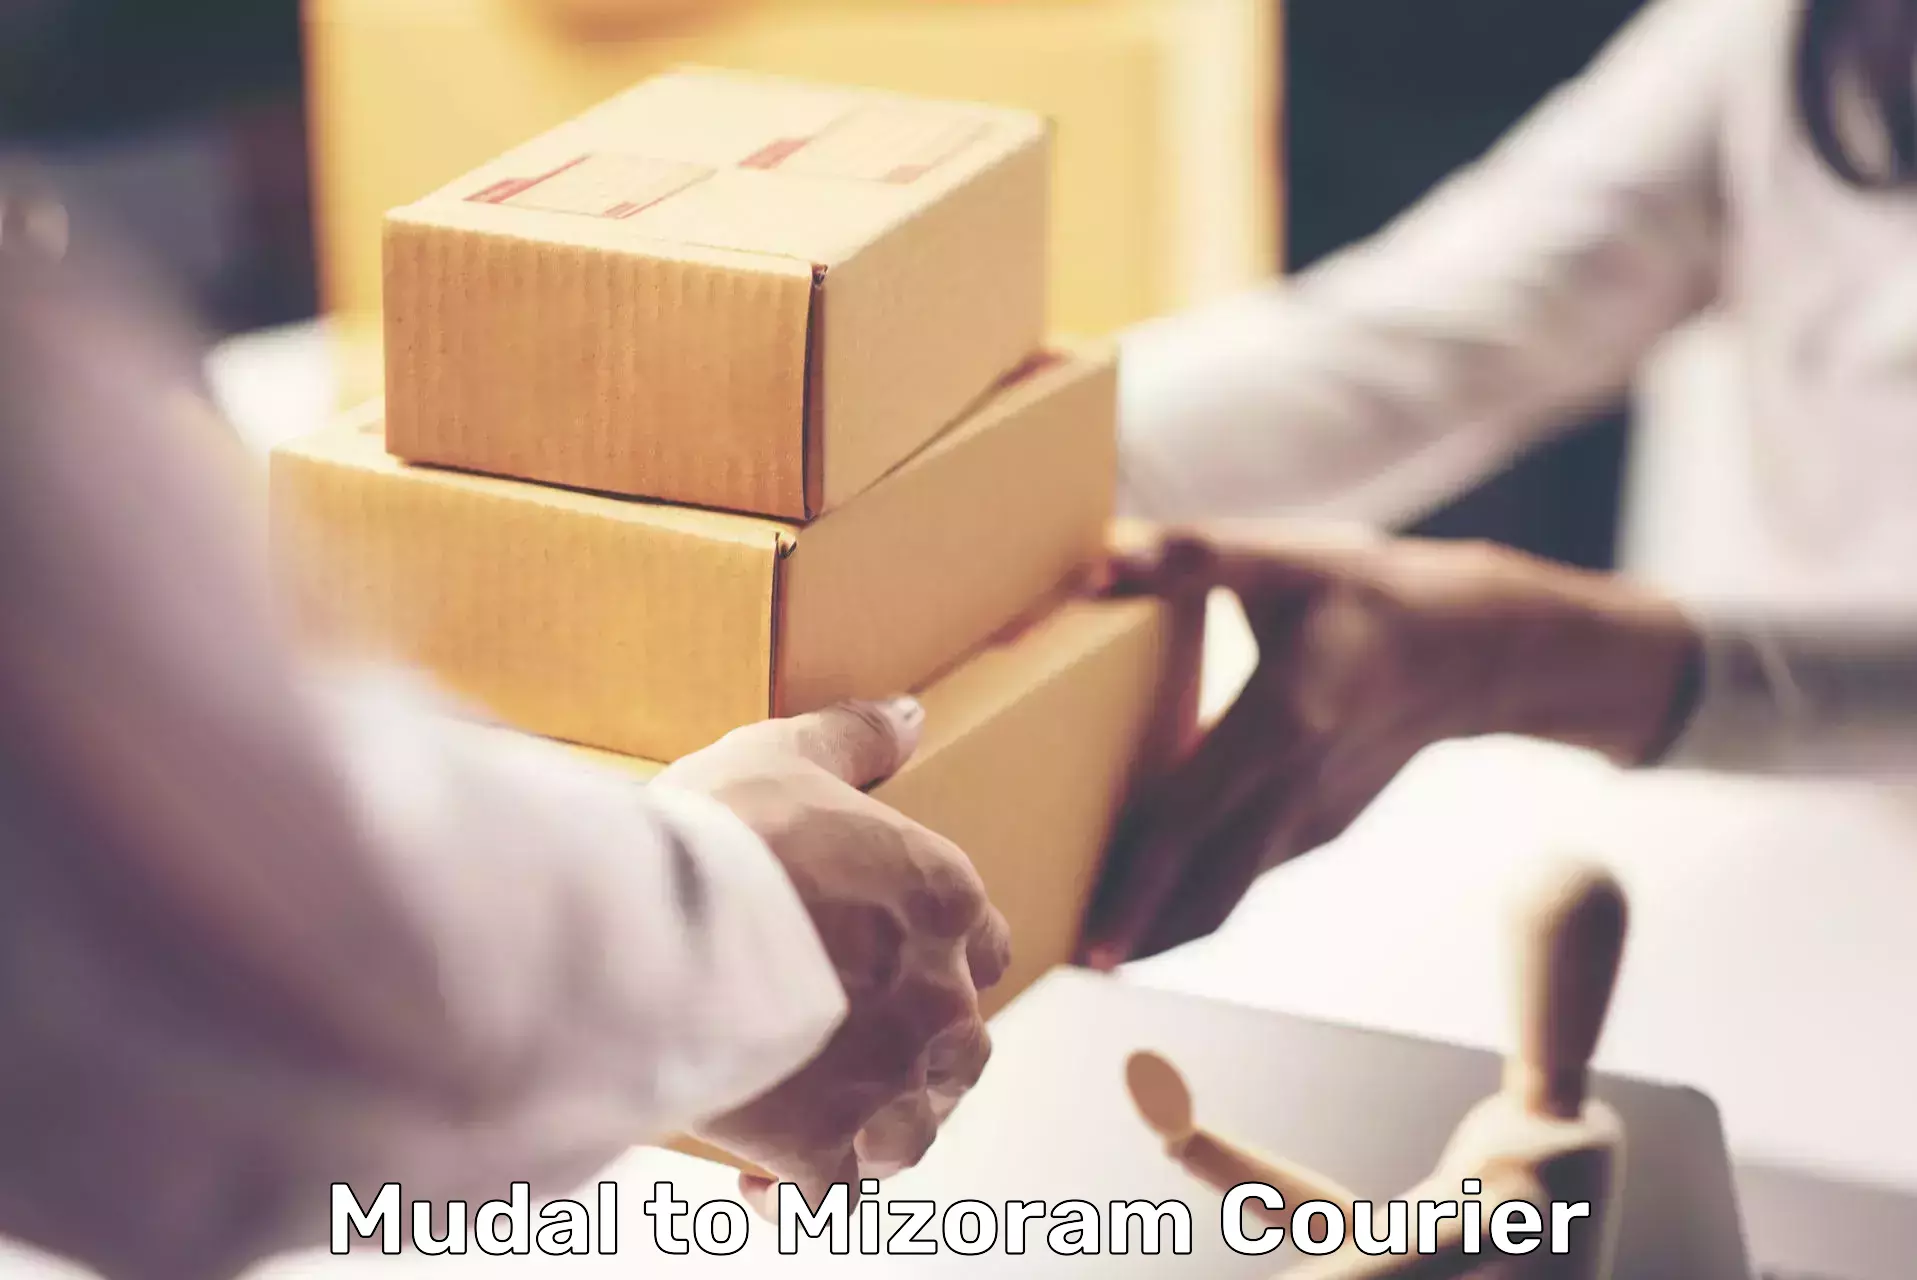 Cash on delivery service Mudal to Darlawn